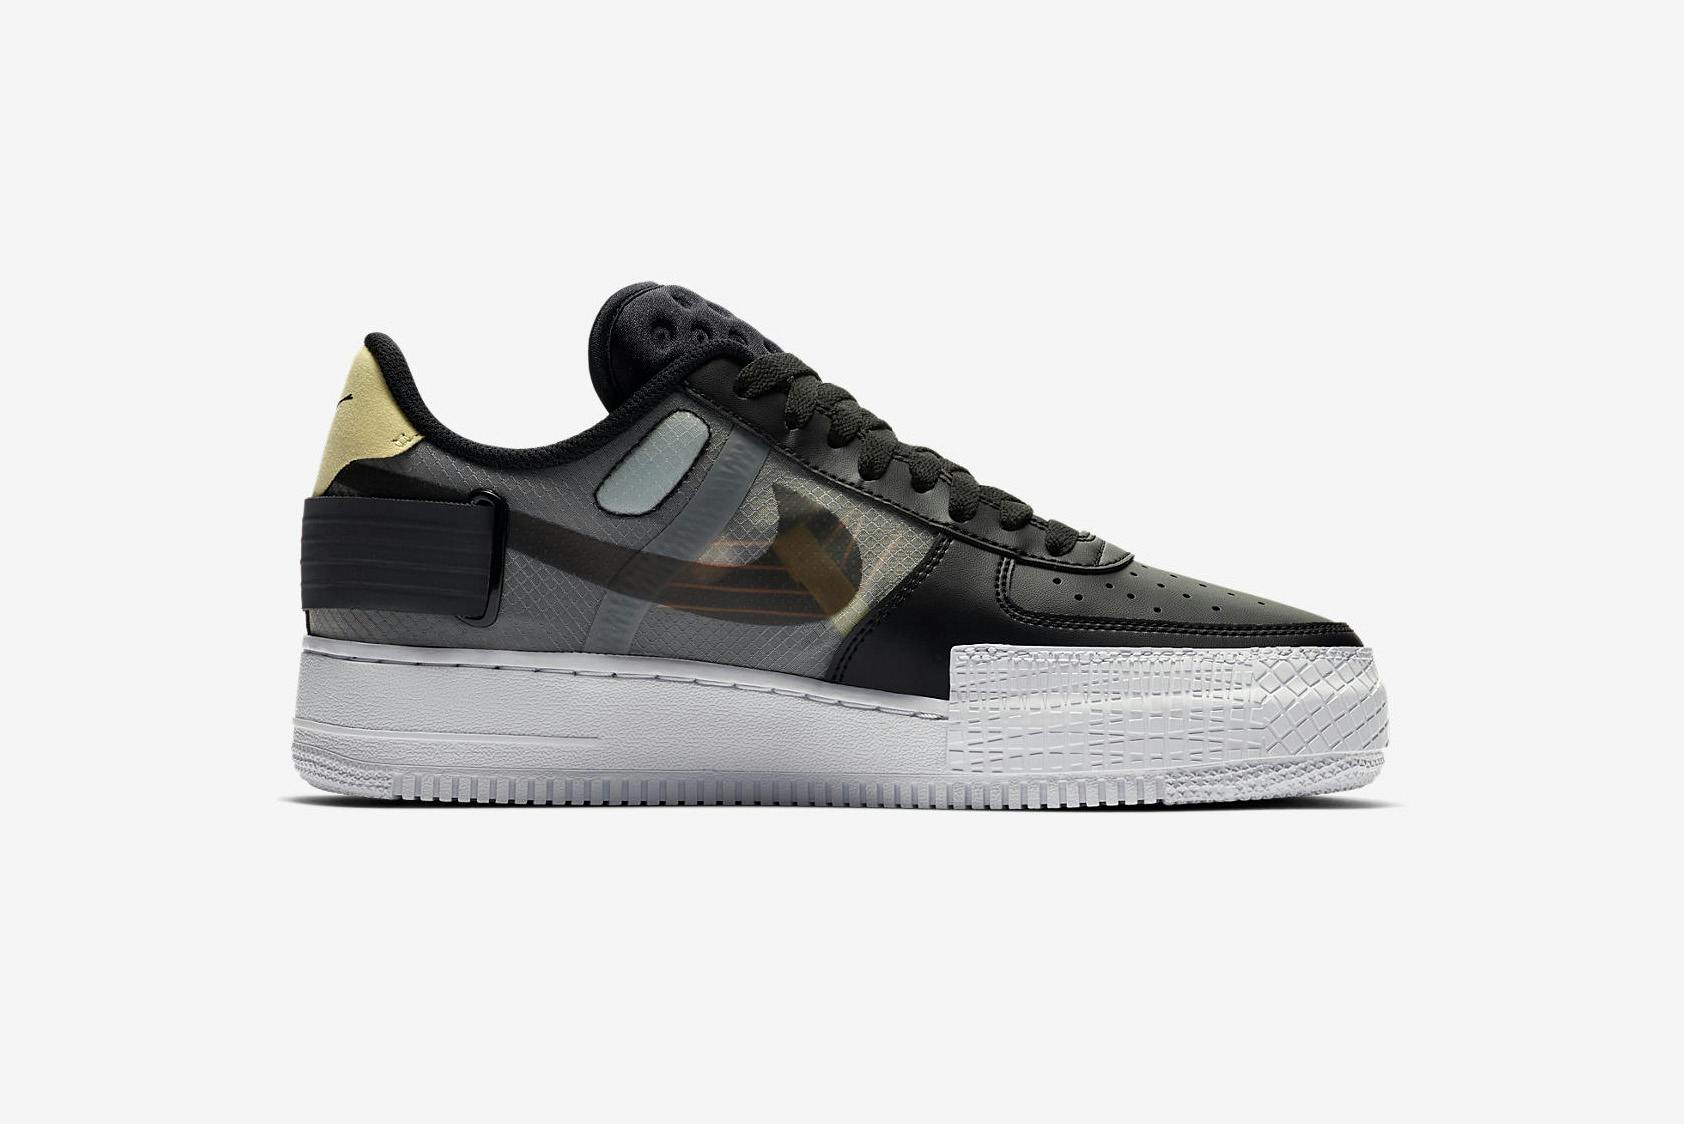 NIKE AIR FORCE 1 “SINCE 82” – REGISTER NOW